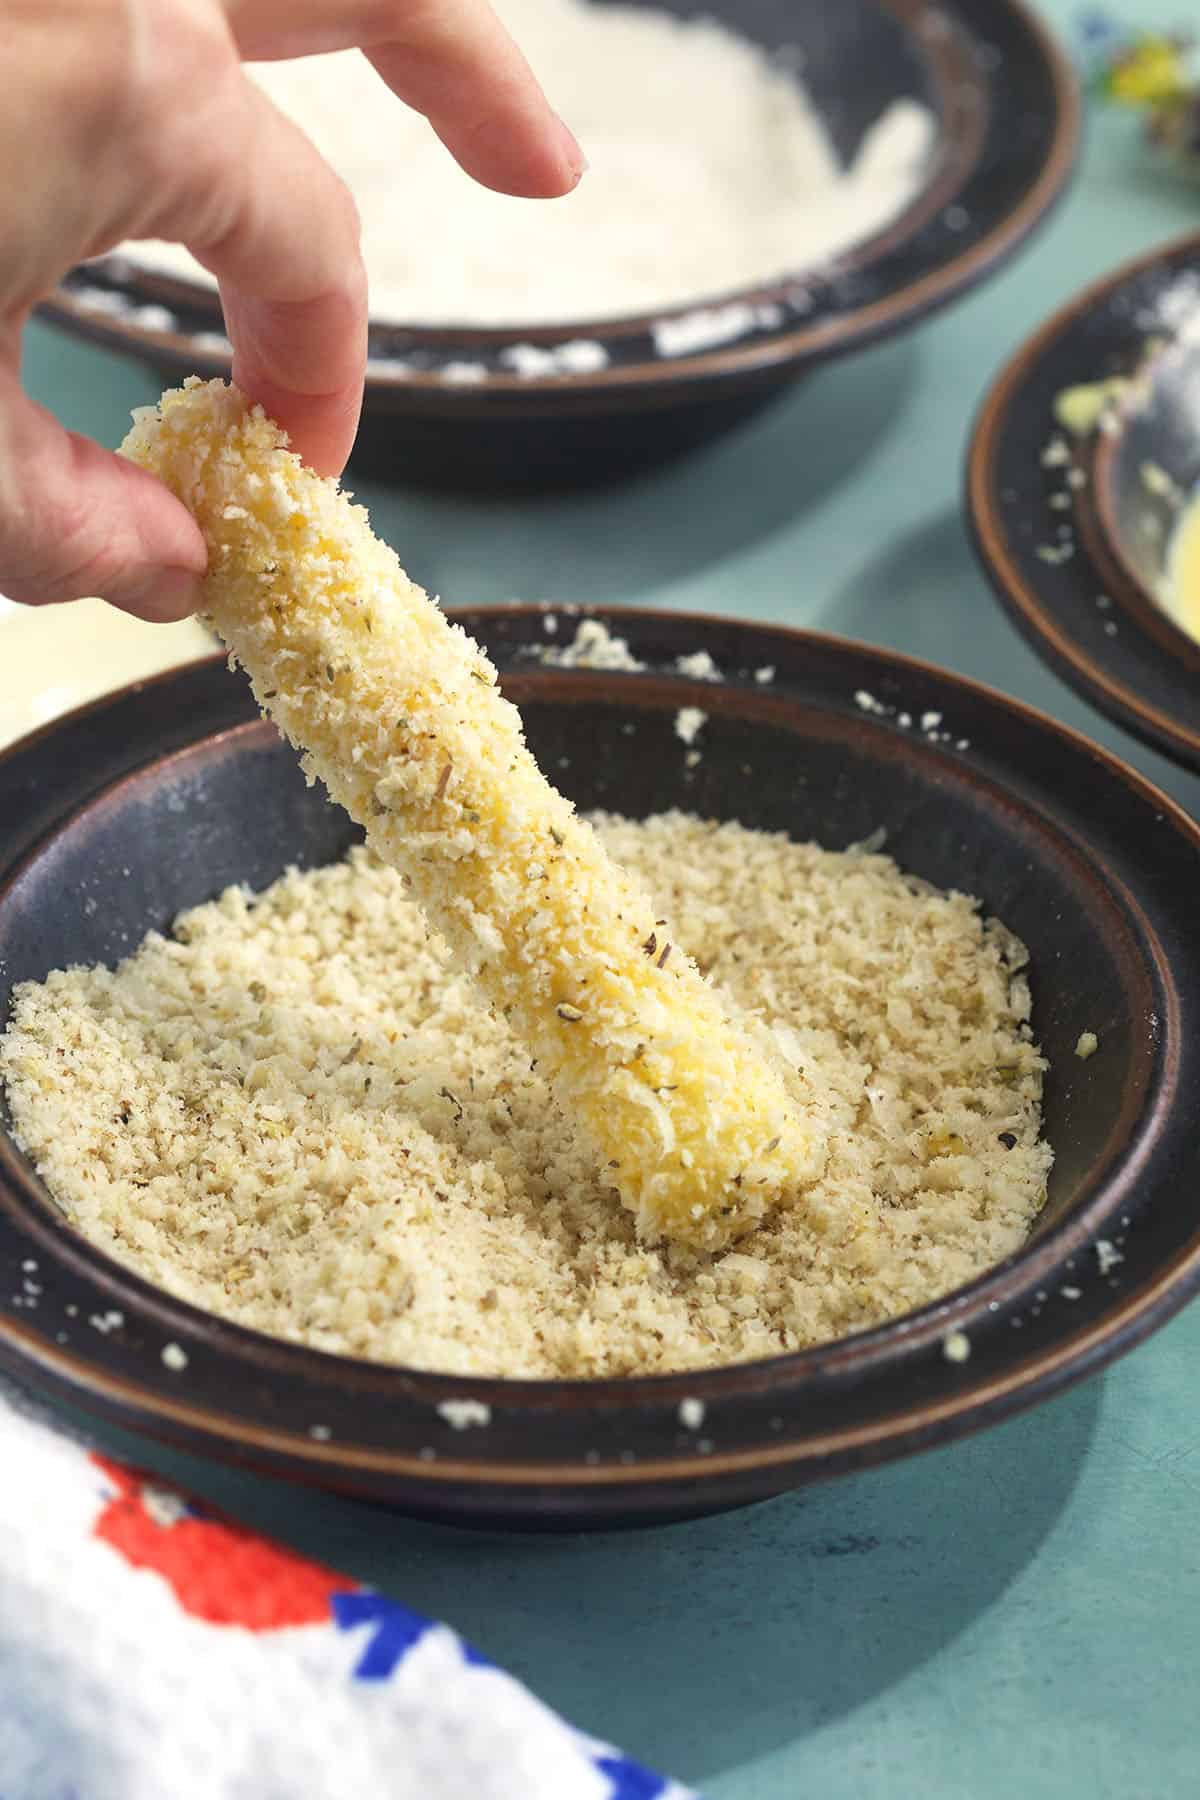 A mozzarella stick is being coated in breadcrumbs.